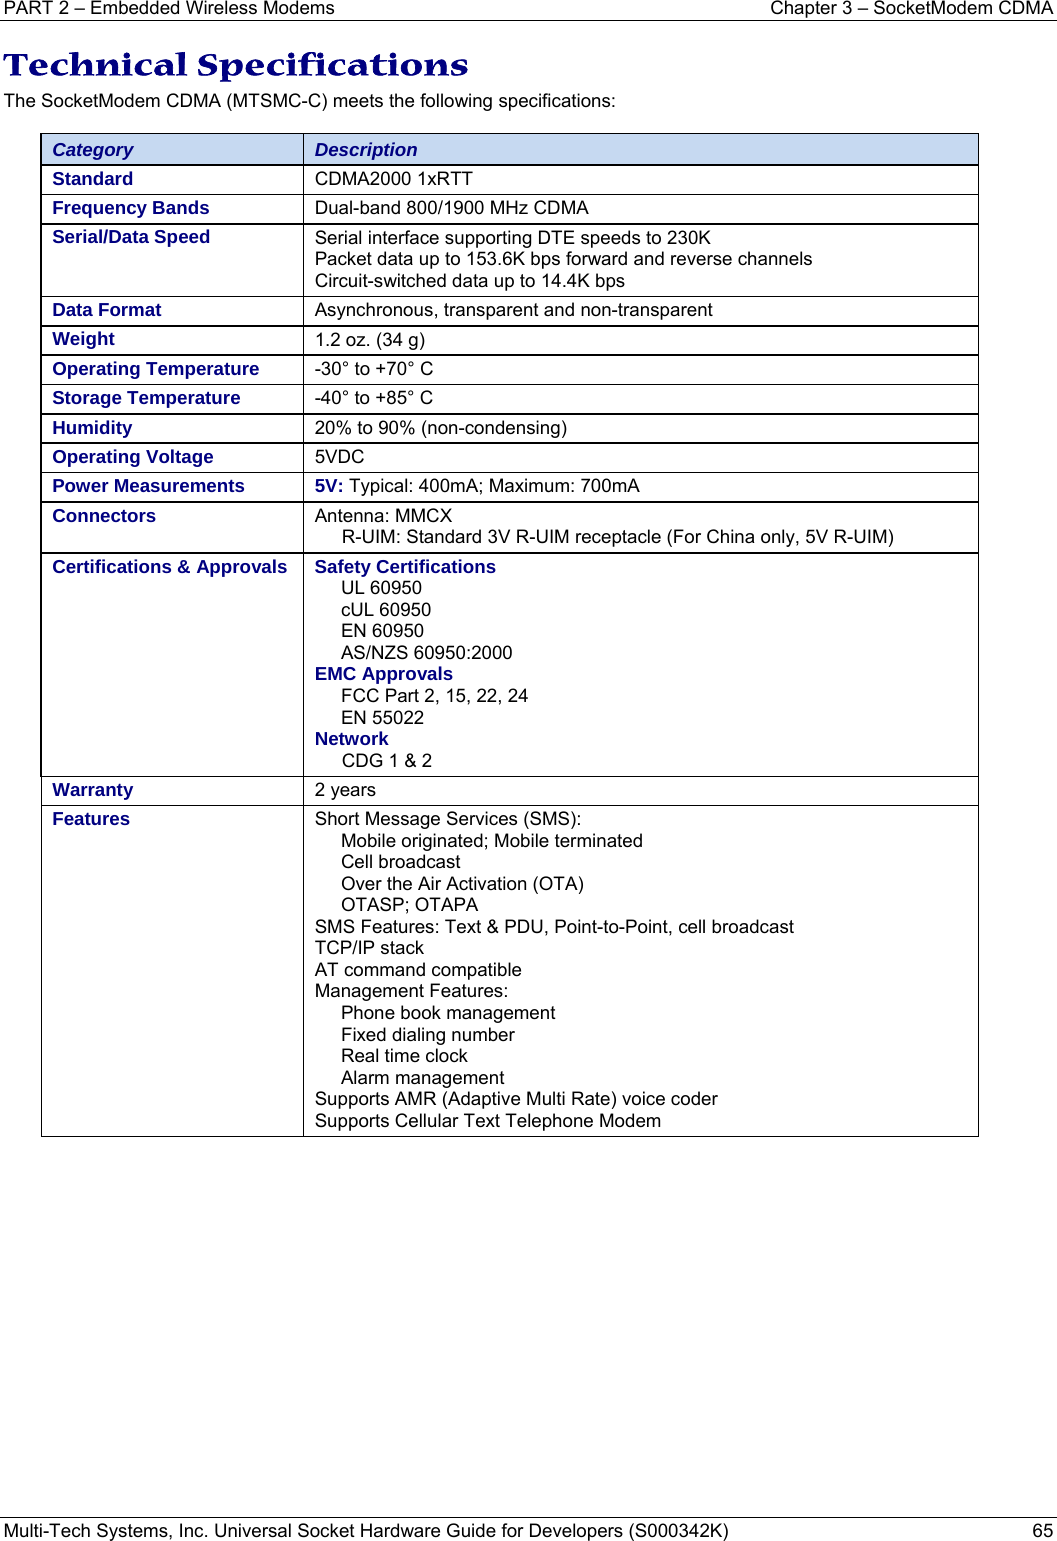 PART 2 – Embedded Wireless Modems  Chapter 3 – SocketModem CDMA  Multi-Tech Systems, Inc. Universal Socket Hardware Guide for Developers (S000342K)  65  Technical Specifications The SocketModem CDMA (MTSMC-C) meets the following specifications:   Category  Description Standard  CDMA2000 1xRTT Frequency Bands  Dual-band 800/1900 MHz CDMA Serial/Data Speed  Serial interface supporting DTE speeds to 230K Packet data up to 153.6K bps forward and reverse channels Circuit-switched data up to 14.4K bps Data Format  Asynchronous, transparent and non-transparent  Weight  1.2 oz. (34 g) Operating Temperature  -30° to +70° C   Storage Temperature  -40° to +85° C    Humidity  20% to 90% (non-condensing)   Operating Voltage  5VDC Power Measurements  5V: Typical: 400mA; Maximum: 700mA  Connectors  Antenna: MMCX R-UIM: Standard 3V R-UIM receptacle (For China only, 5V R-UIM) Certifications &amp; Approvals Safety Certifications UL 60950 cUL 60950 EN 60950 AS/NZS 60950:2000 EMC Approvals FCC Part 2, 15, 22, 24 EN 55022  Network CDG 1 &amp; 2 Warranty  2 years  Features  Short Message Services (SMS): Mobile originated; Mobile terminated Cell broadcast Over the Air Activation (OTA) OTASP; OTAPA SMS Features: Text &amp; PDU, Point-to-Point, cell broadcast TCP/IP stack AT command compatible Management Features: Phone book management Fixed dialing number Real time clock Alarm management Supports AMR (Adaptive Multi Rate) voice coder Supports Cellular Text Telephone Modem    